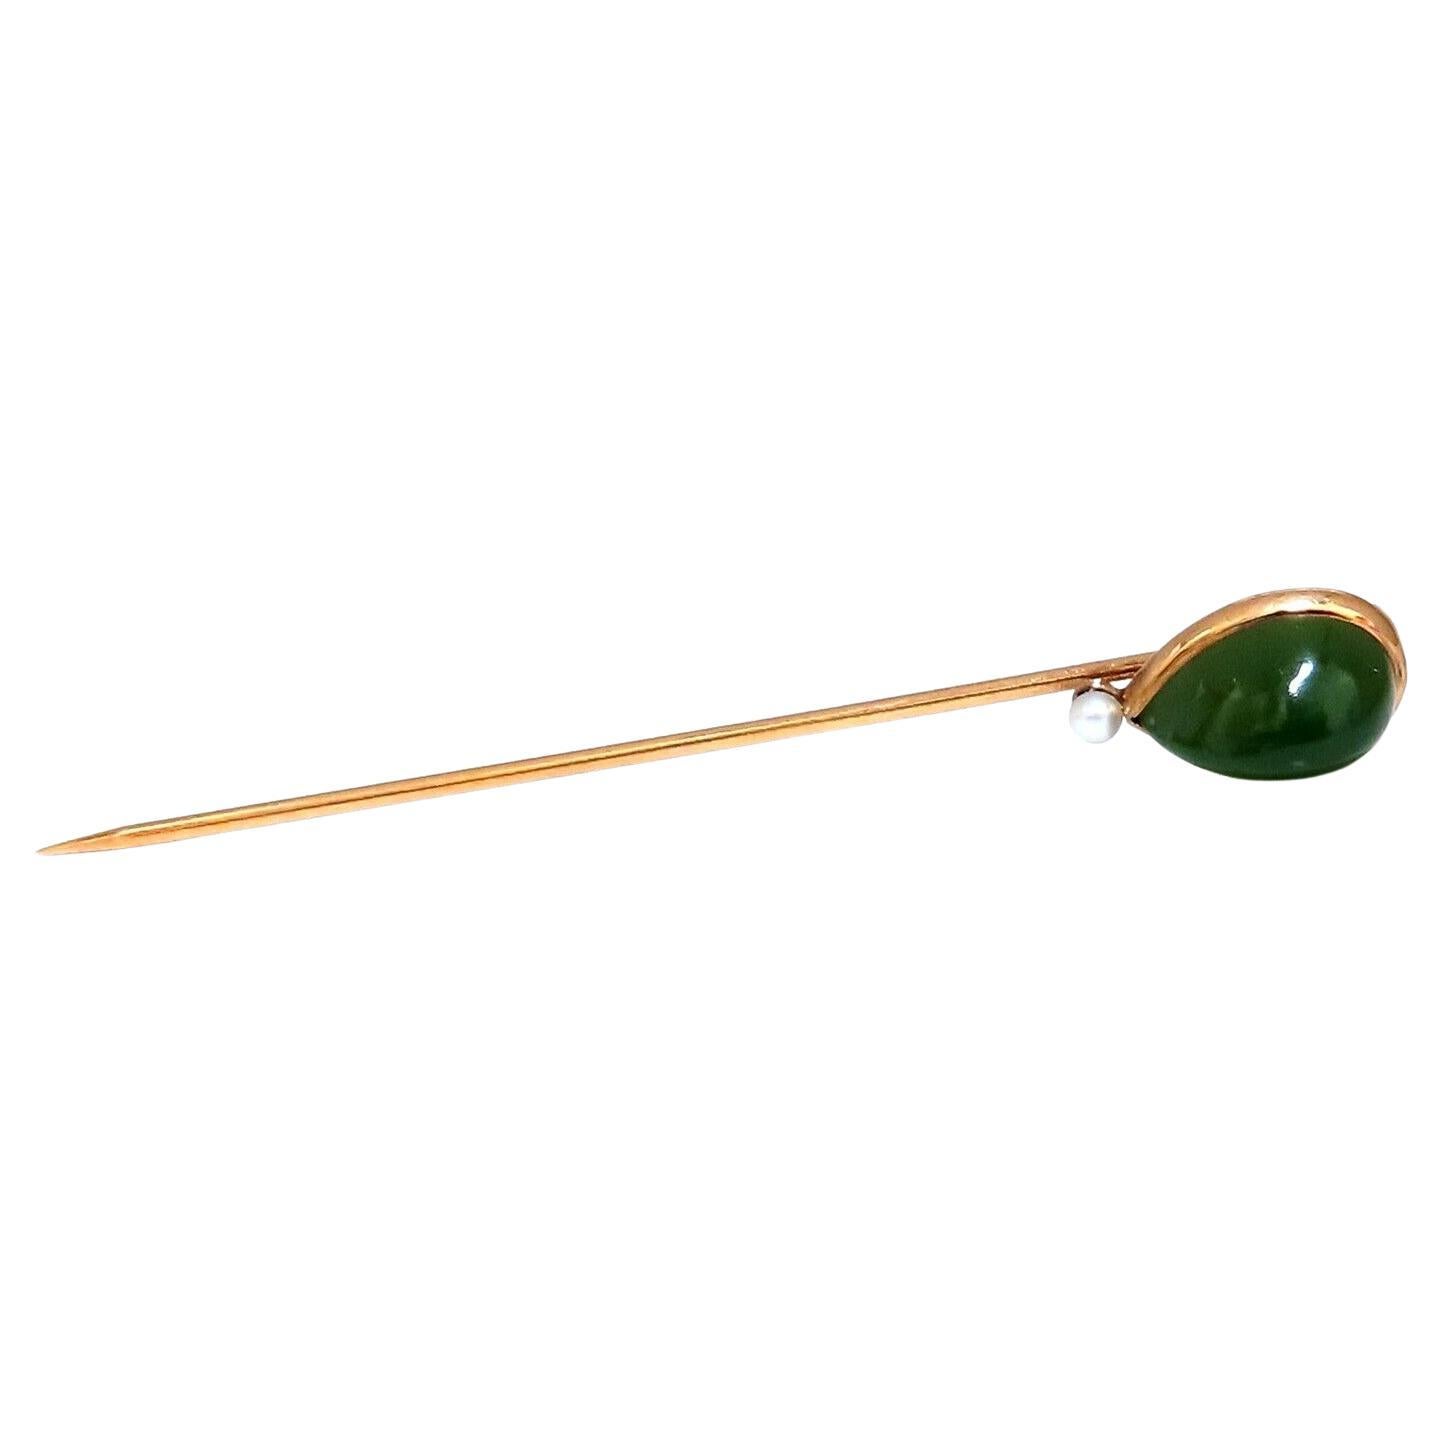 Natural American Green Jade Hat Stick Pin Scarf 14kt Gold